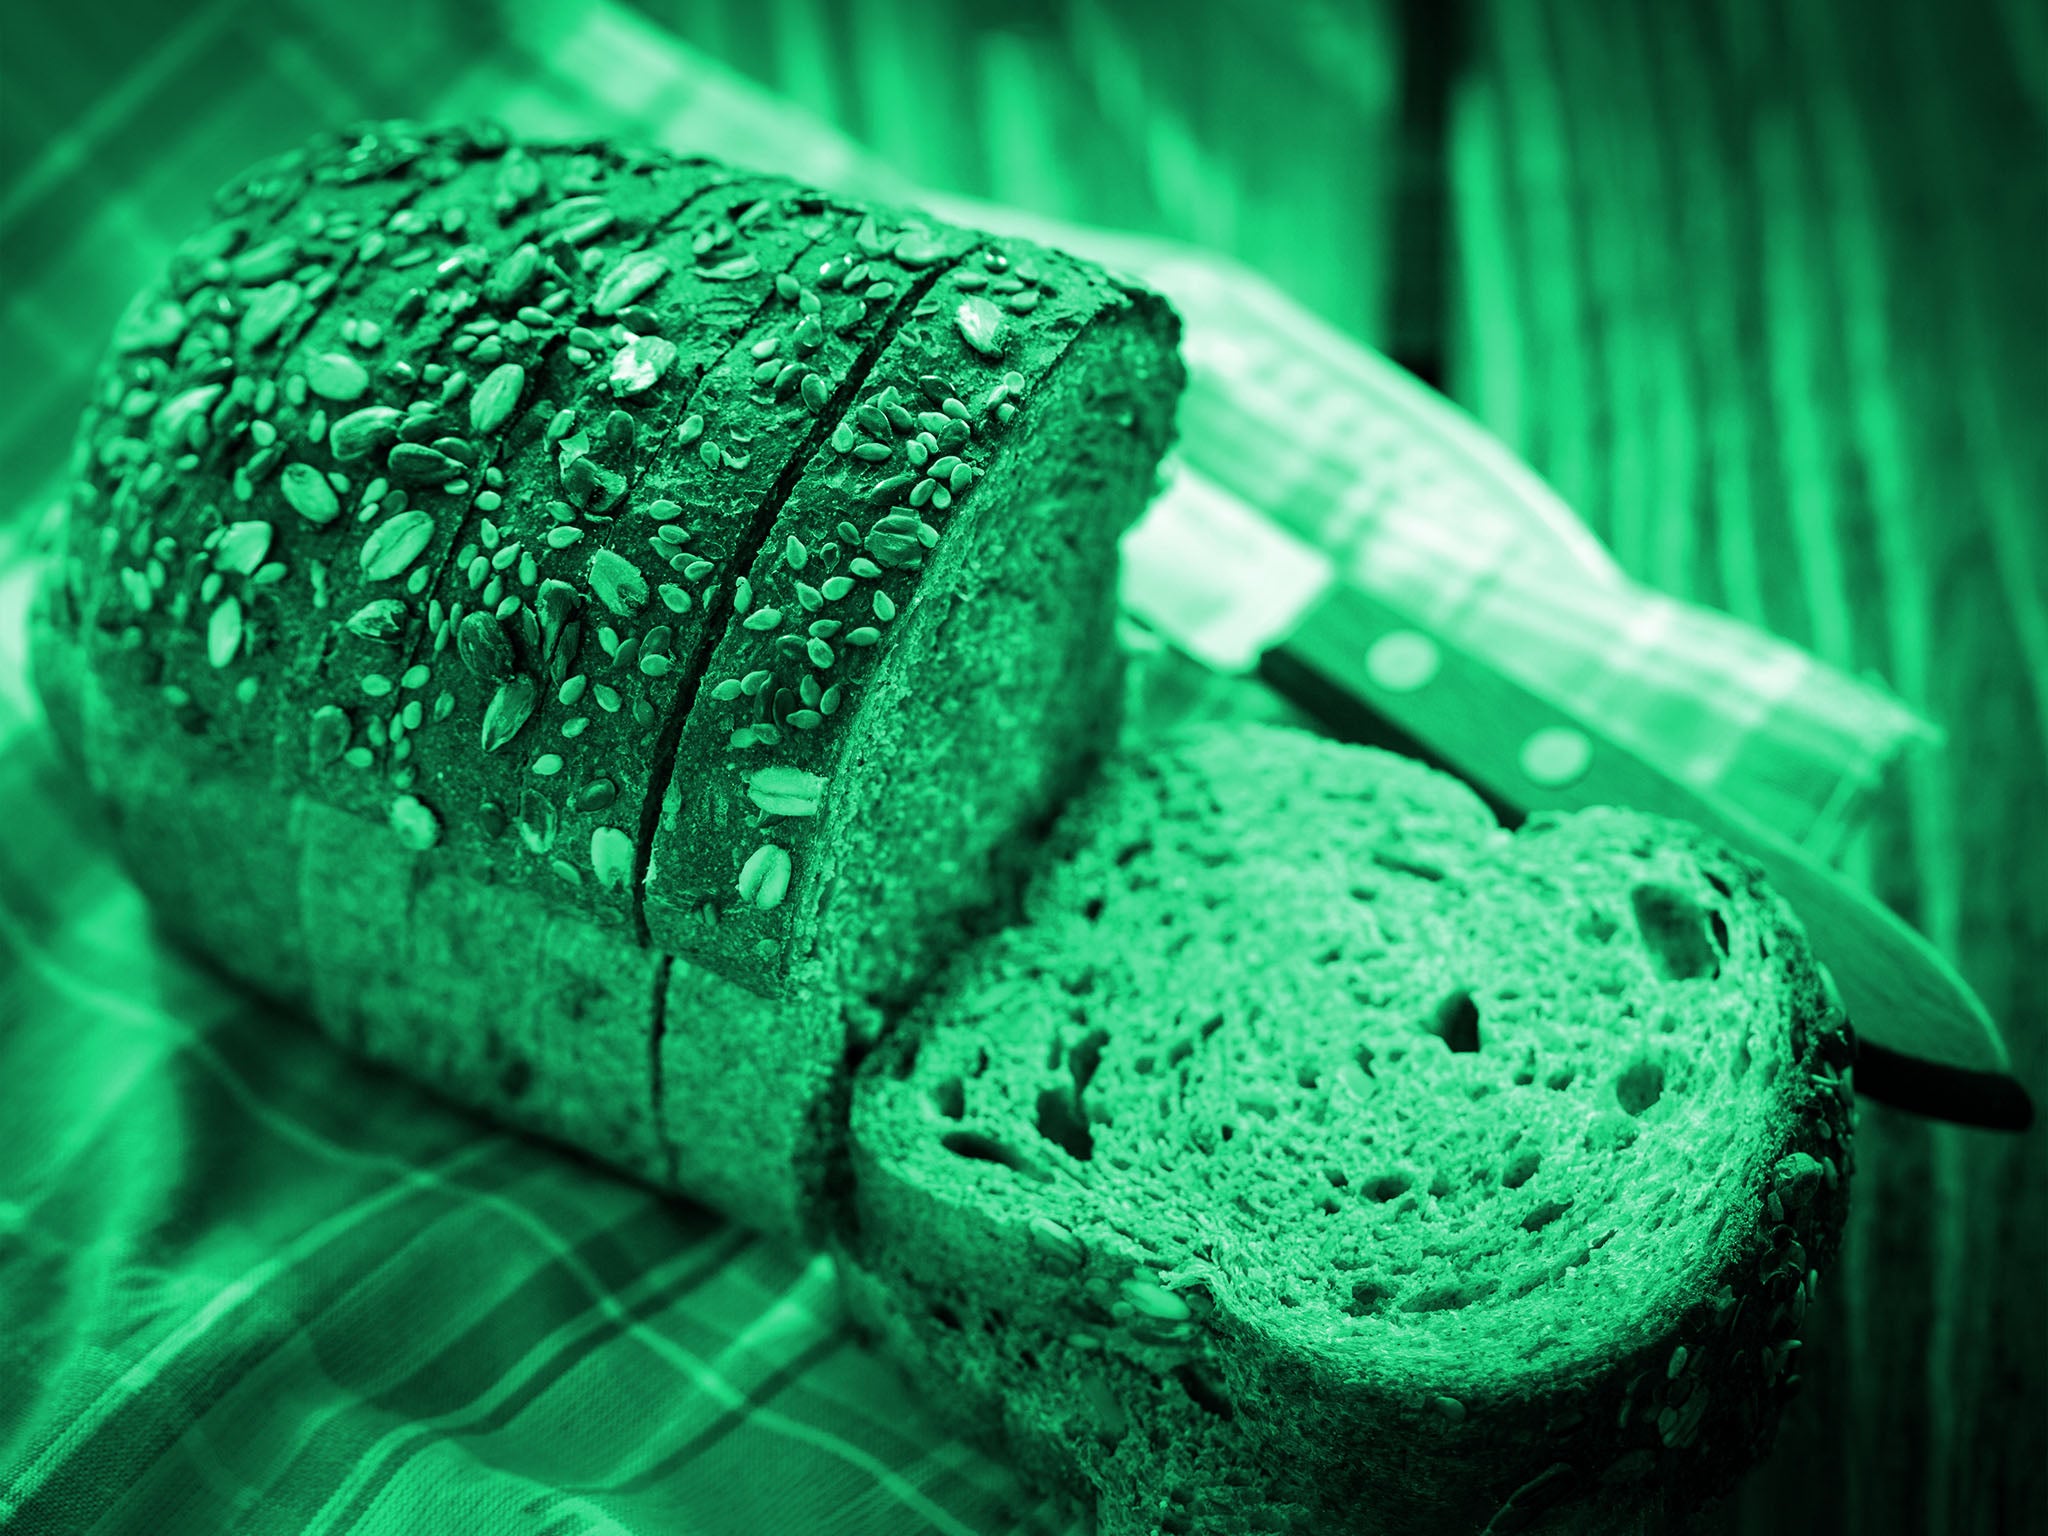 Bread produces significant carbon